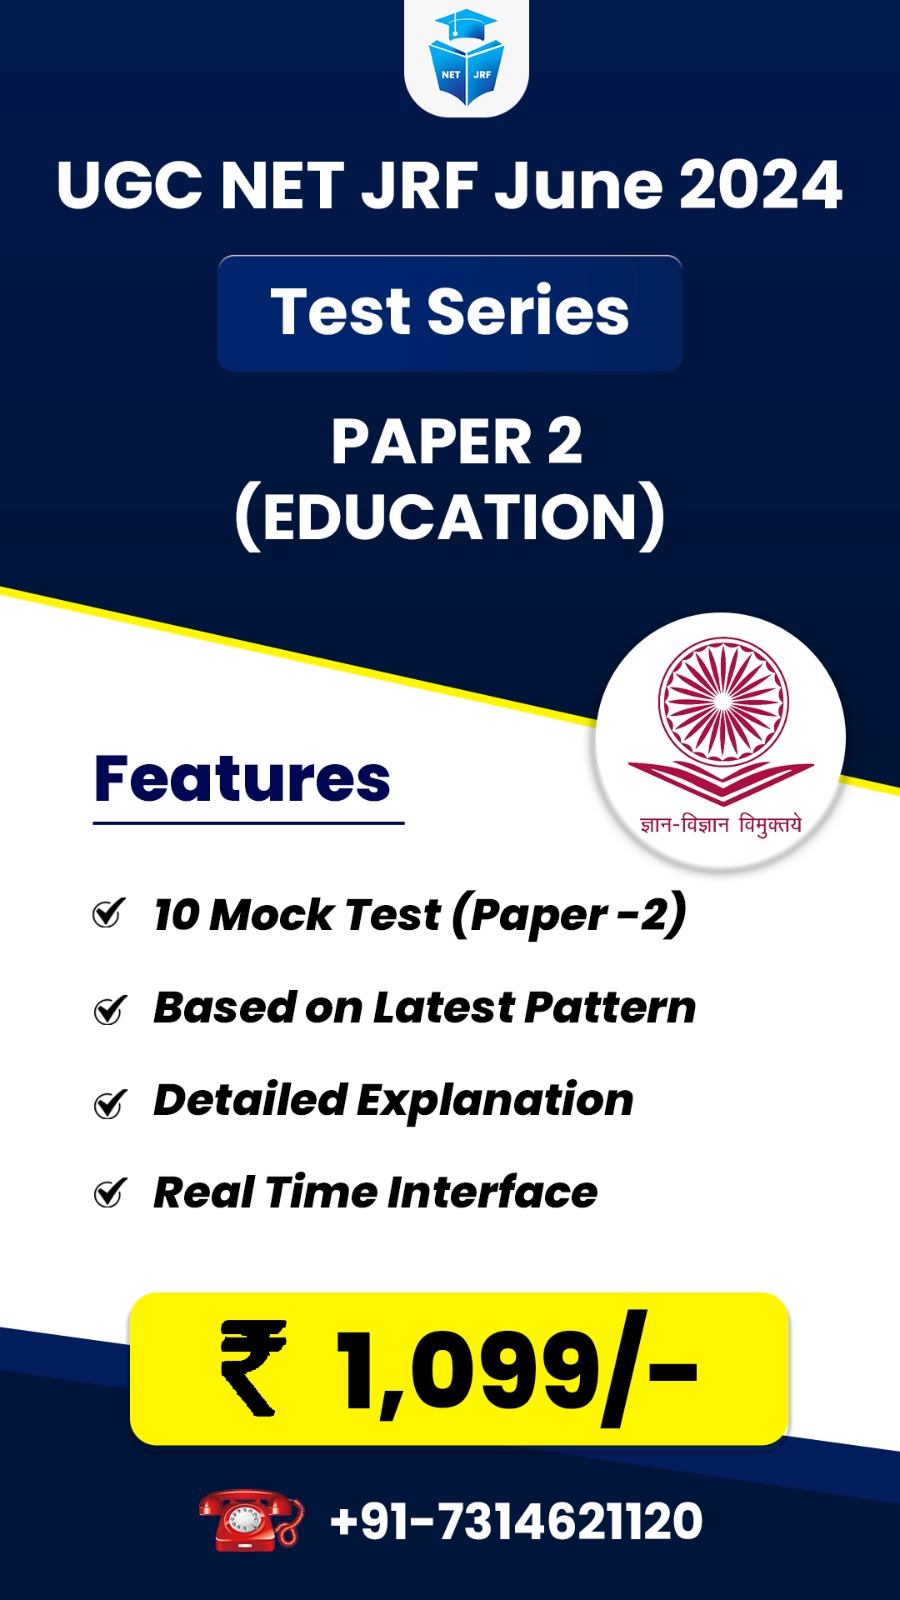 Education (Paper 2) Test Series for June 2024